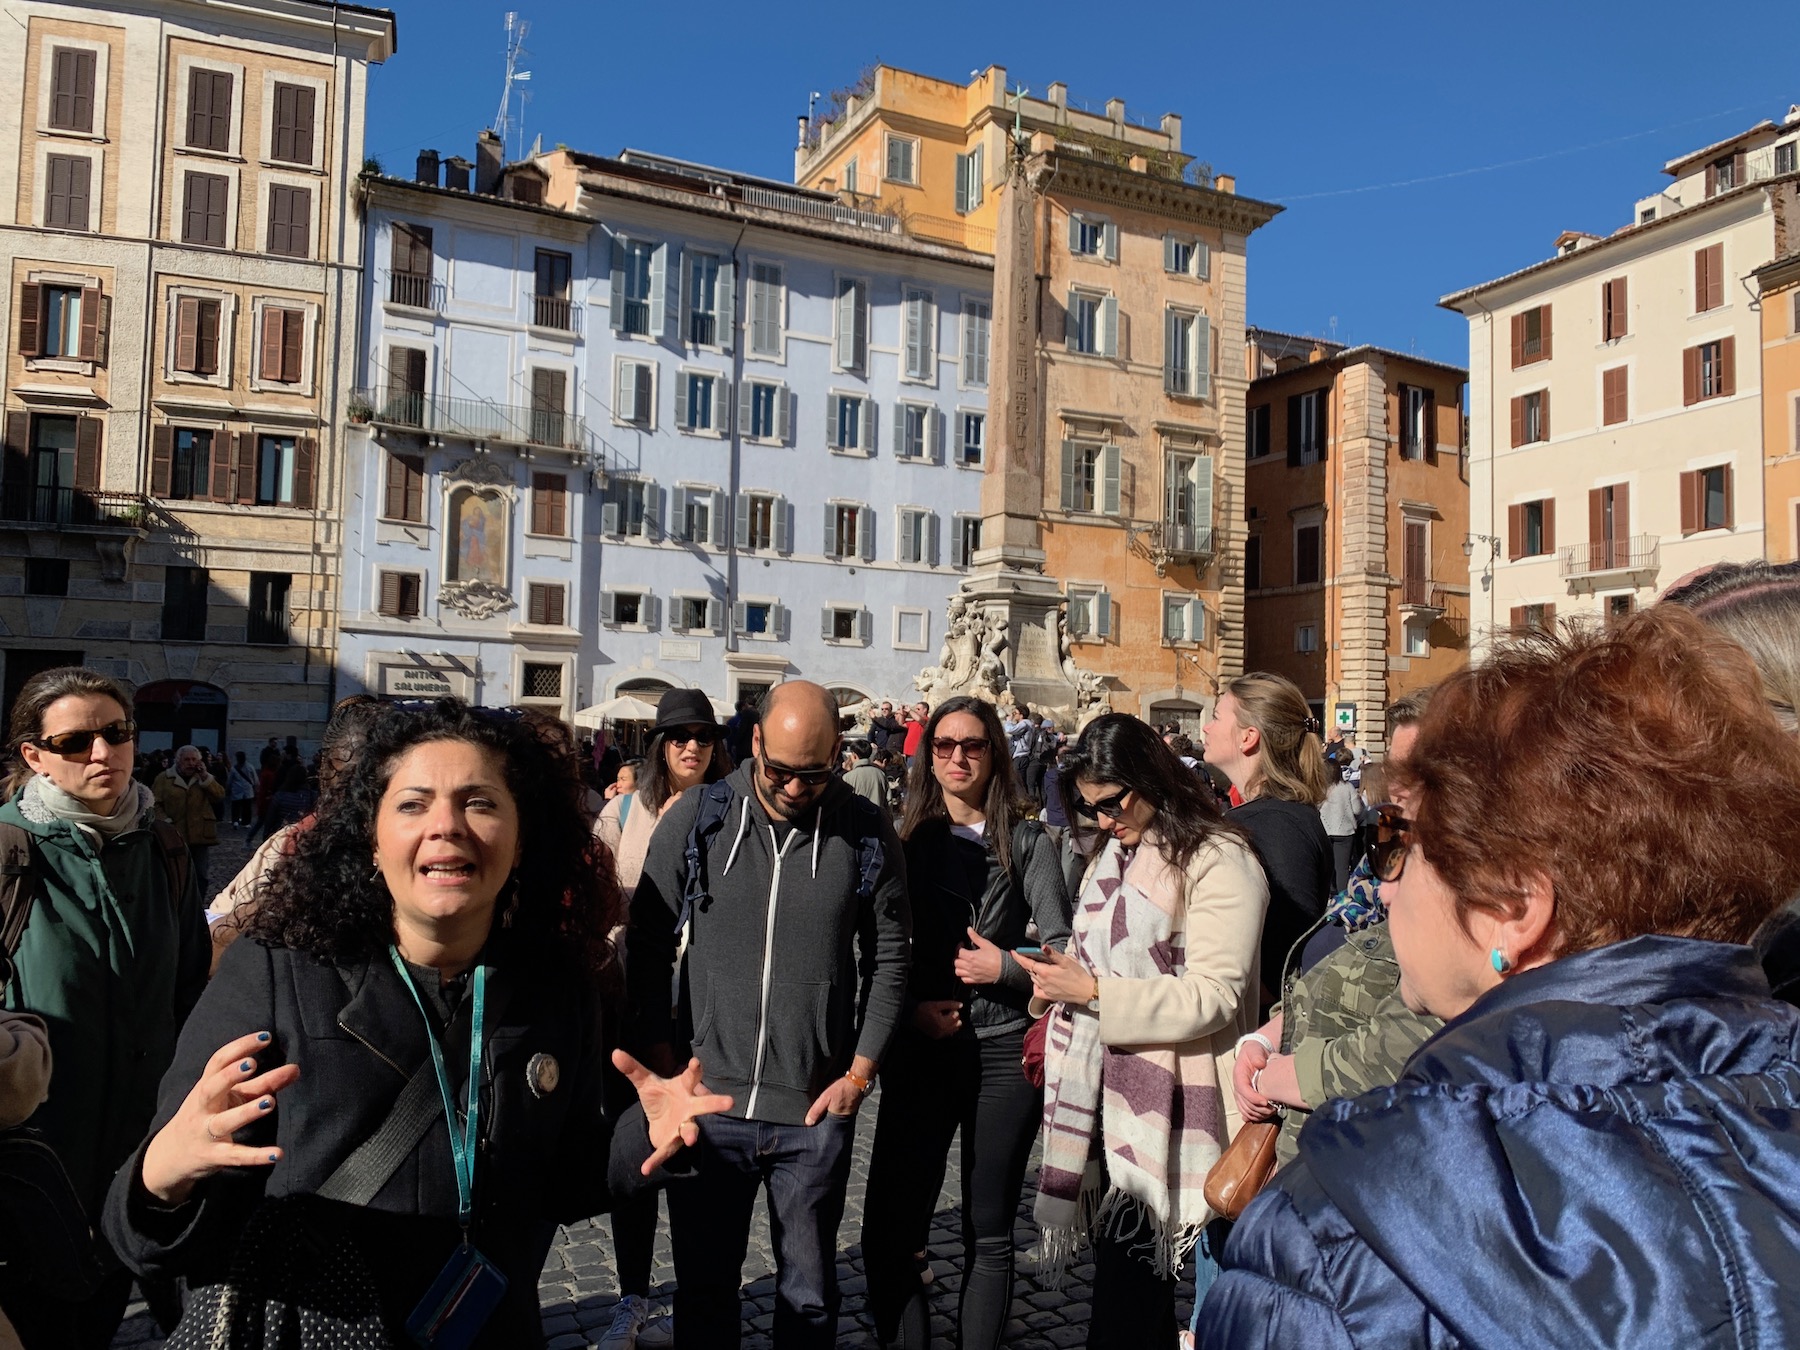 Free walking tour group in Rome Italy